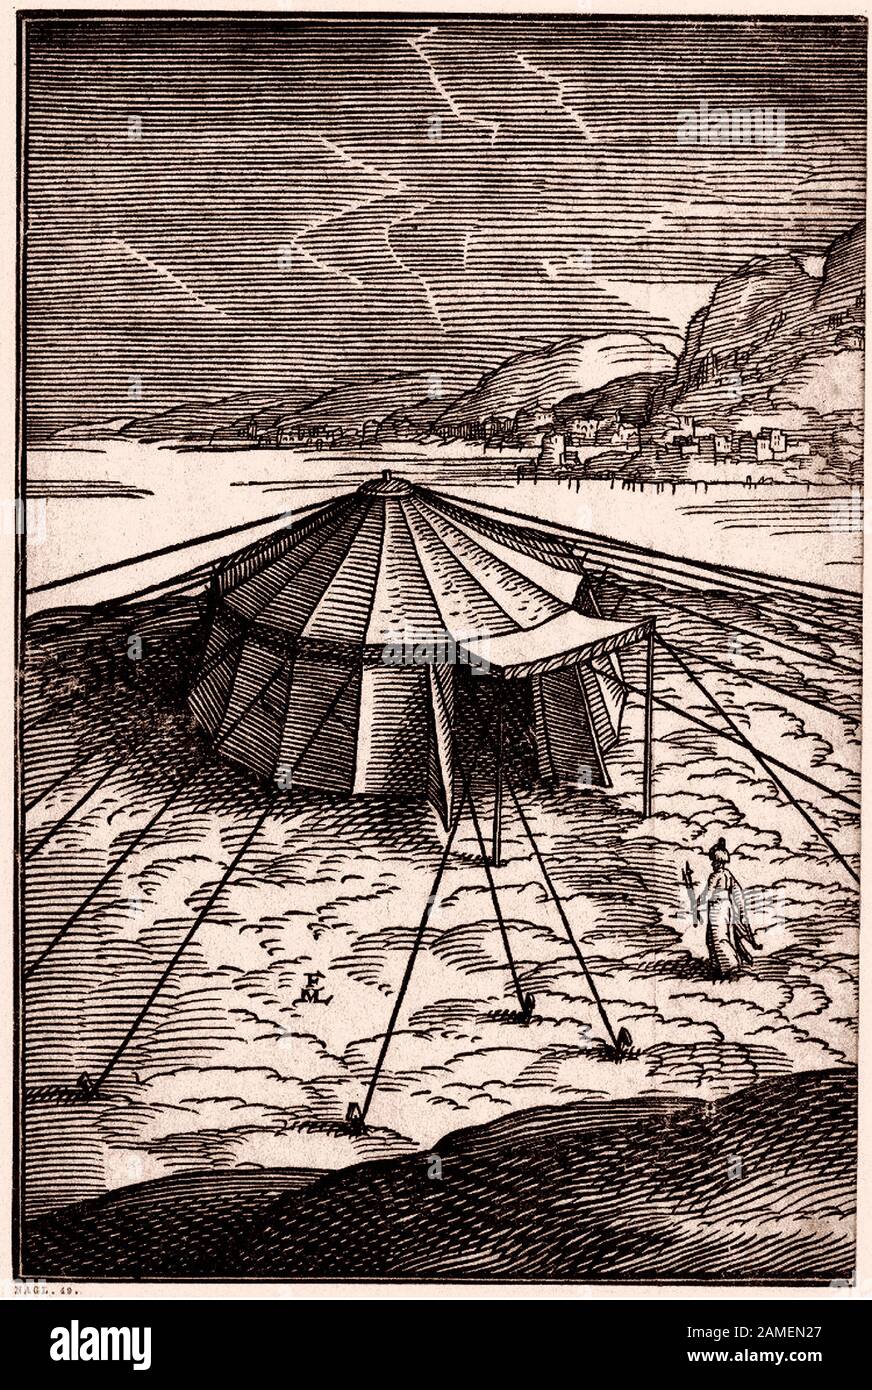 The history of Ottoman Empire. A tartar tent beside a river. By Melchior Lorck. 16th century Stock Photo